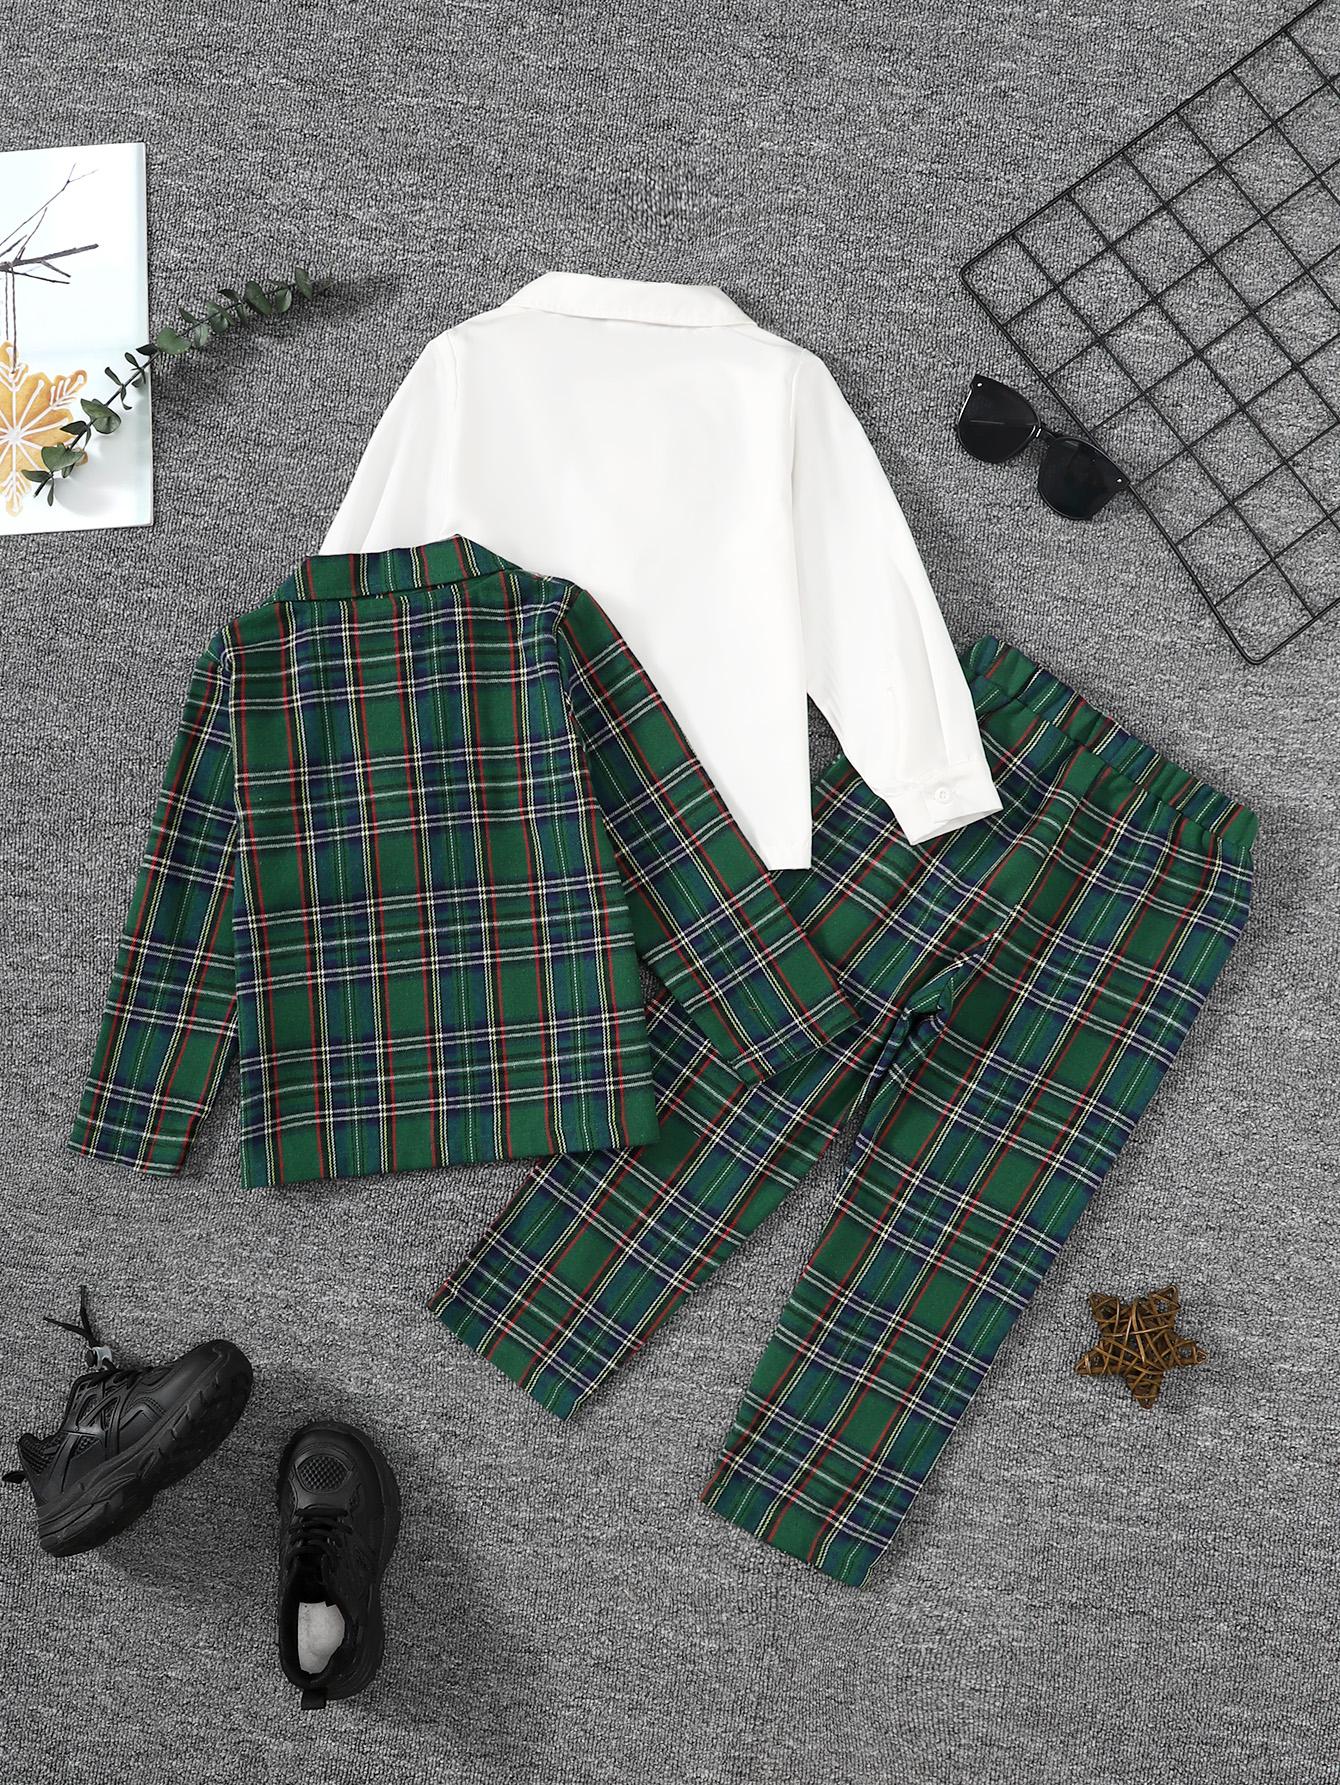 4-7Y Ready Stock 3pcs Boy's Plaid Patter Gentleman Outfit, Bowtie Shirt & Suit & Pants Set, Formal Wear For Speech Performance Birthday Party, 4-7y Kid's Clothes Catpapa 462308166